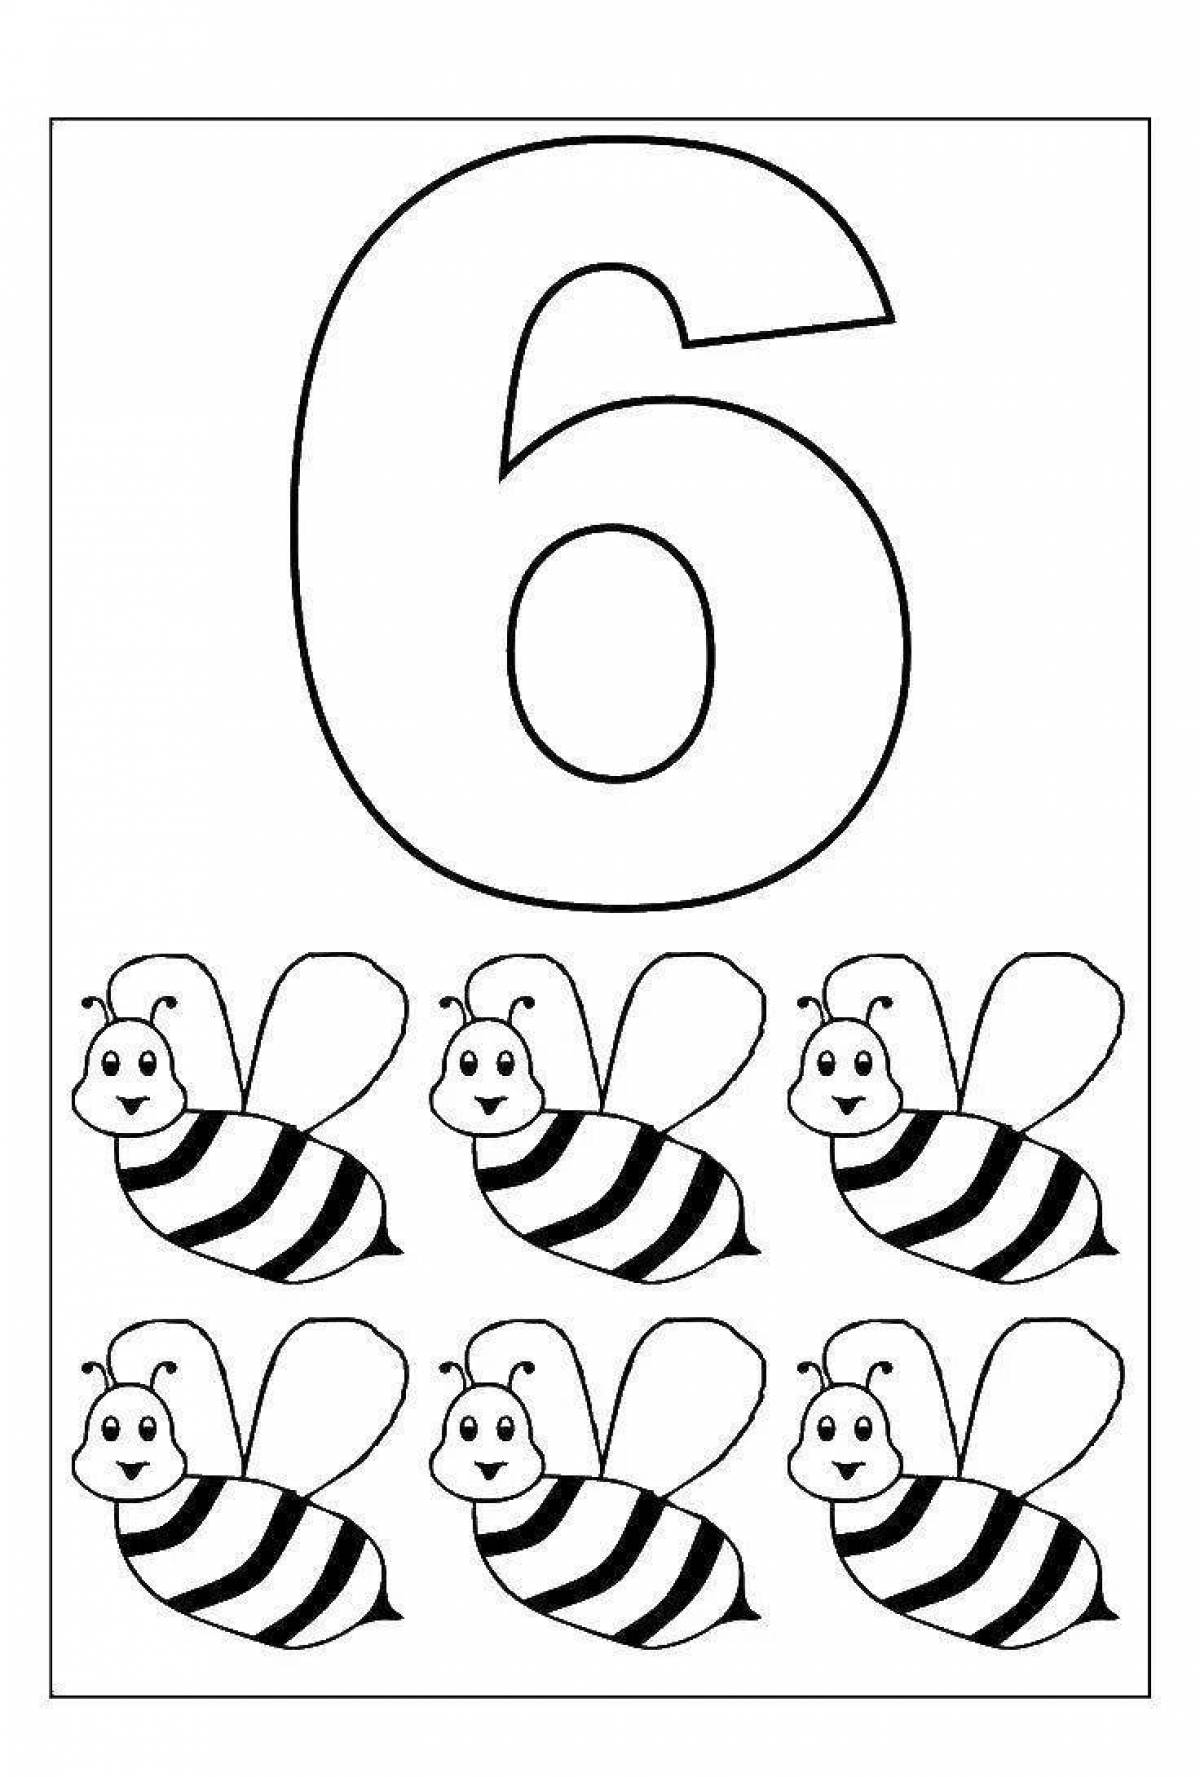 Colored game coloring pages with page numbers